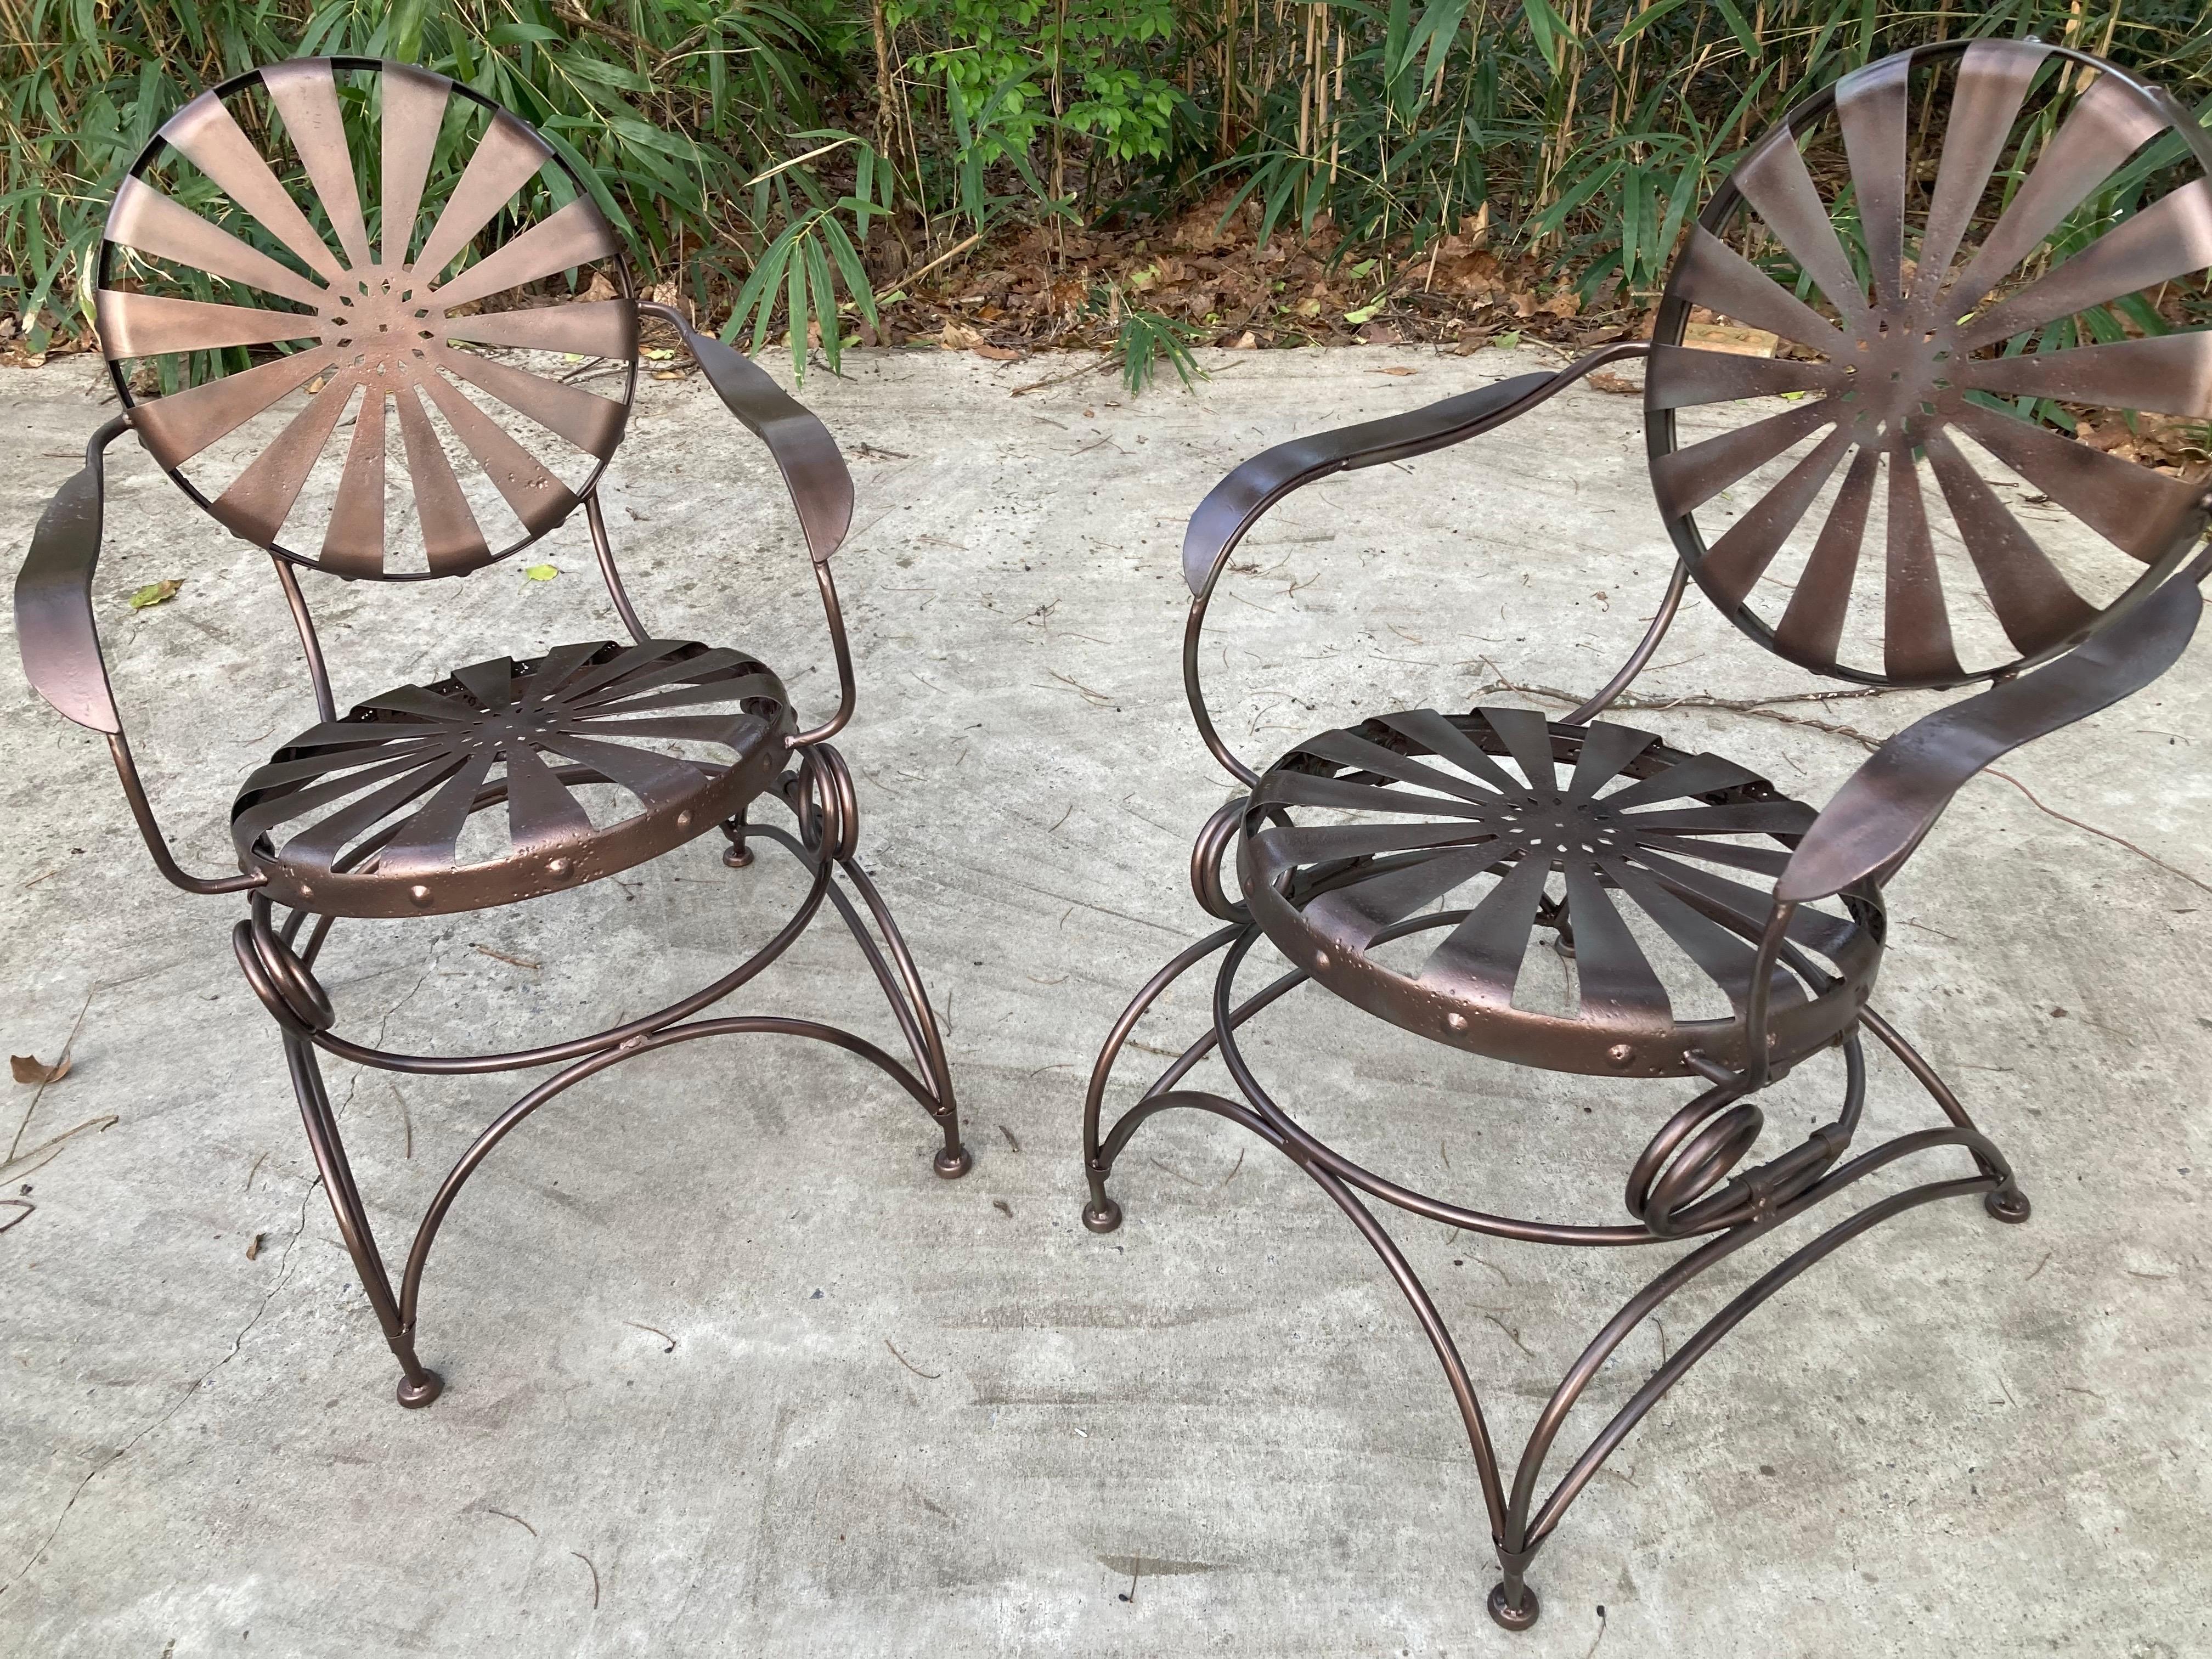 early 20th century carre petite rockers. perfect for the mediterranean garden enthusiast. these have been sandblasted, professional primed and paint in a satin bronzed dark copper hue

no maker’s mark

24 w 25 d 35 tall


shipping from athens, ga